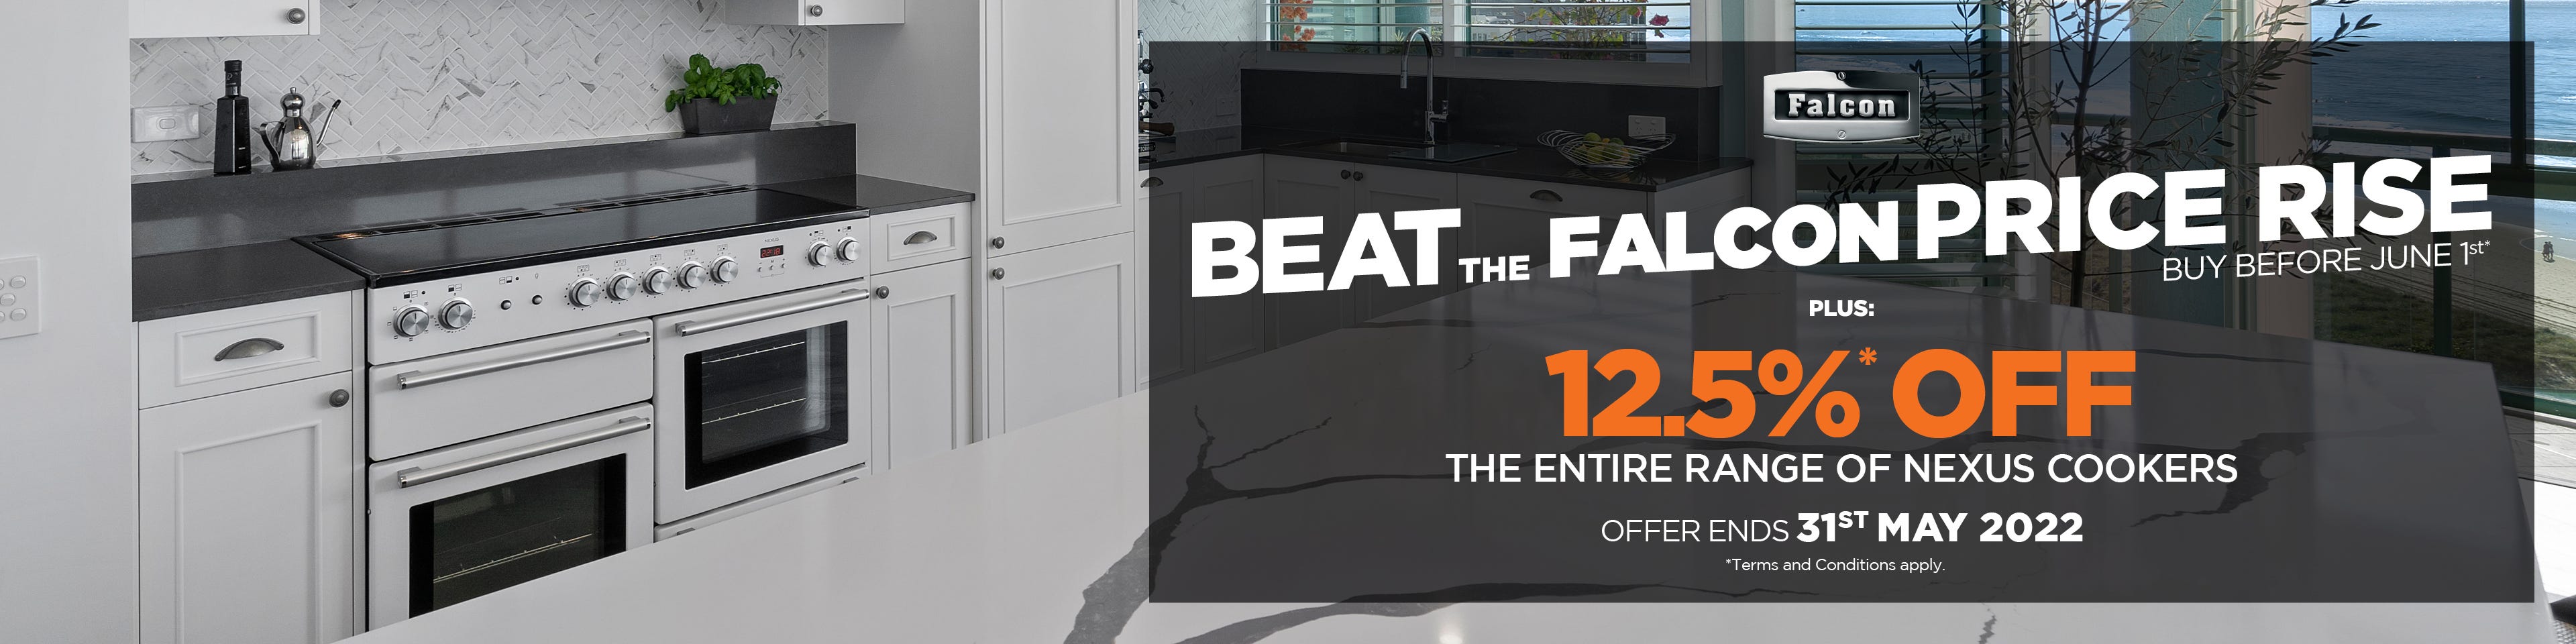 Save 12.5% on all Falcon Nexus series freestanding cookers at e&s. Offer ends 31/05/22. Find out more at an e&s near you today.